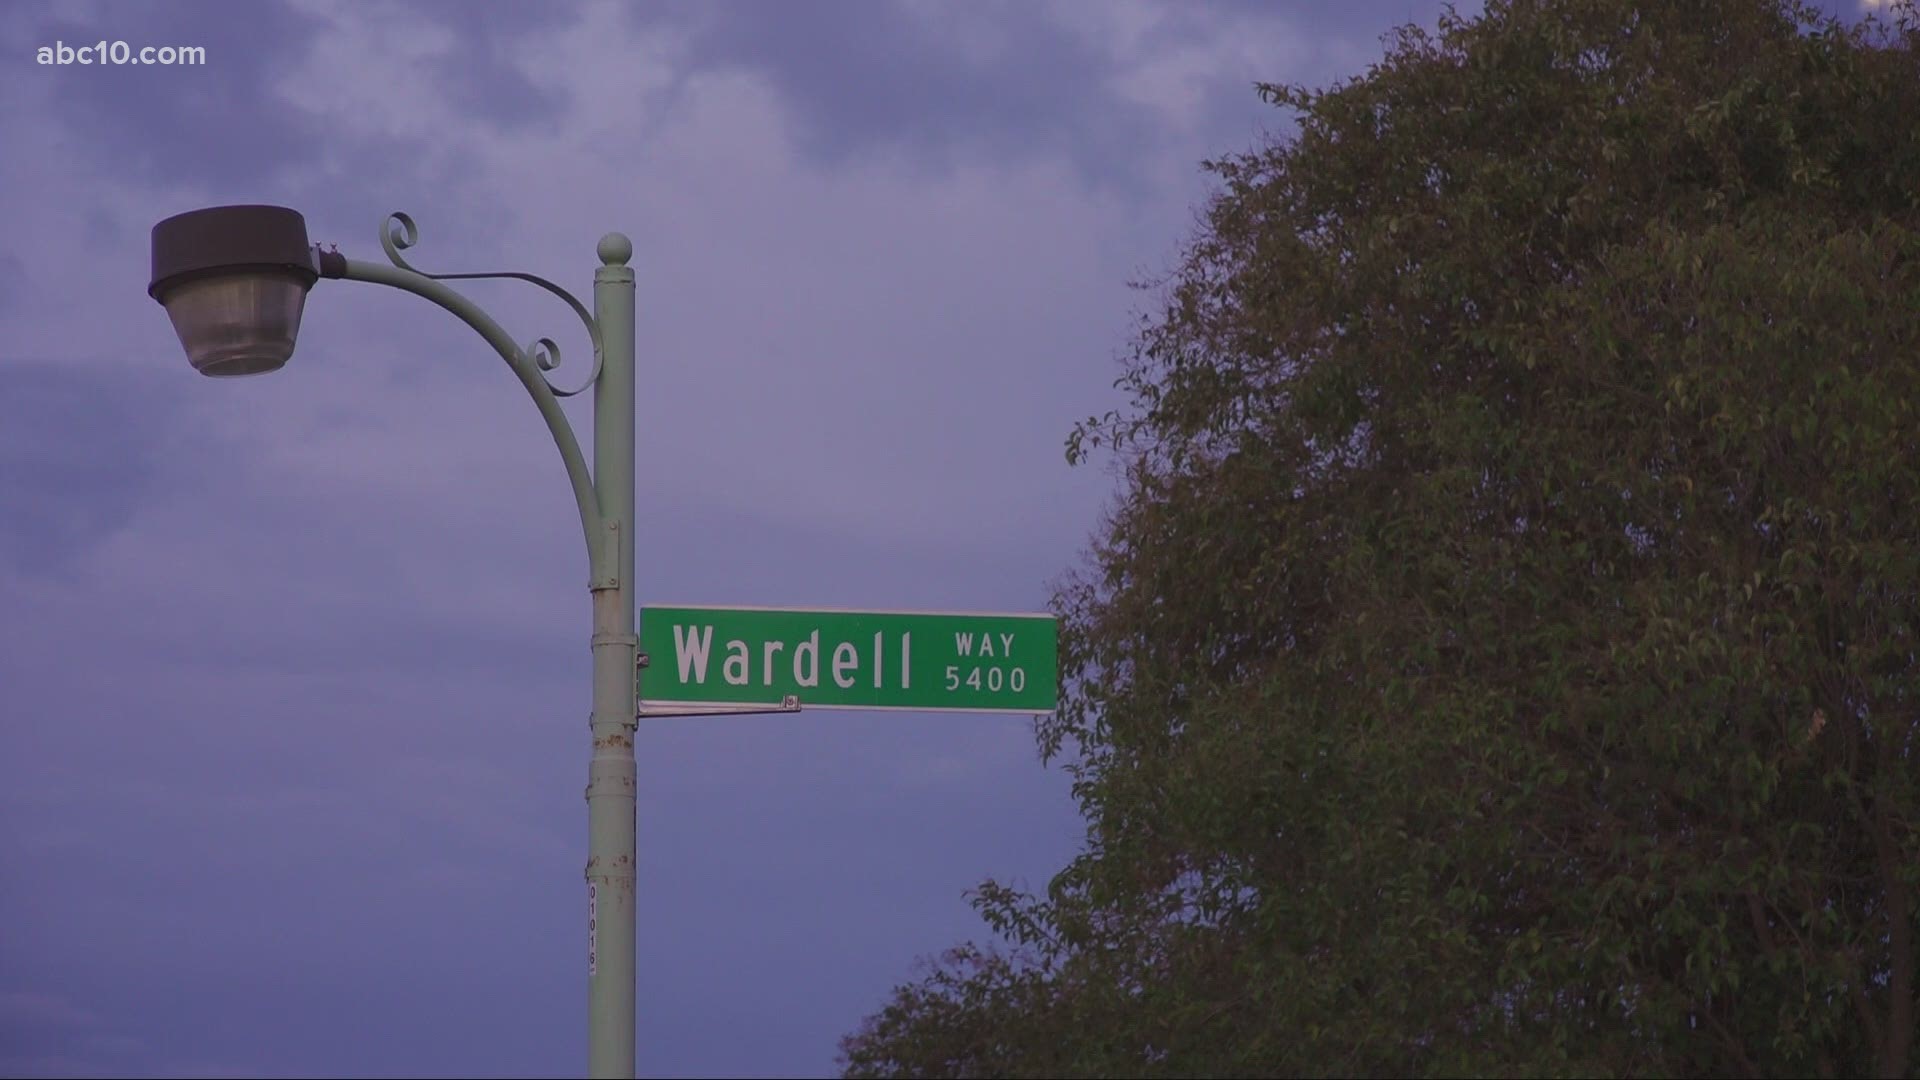 Sacramento police are investigating the deaths of two people who were shot on Wardell Way.